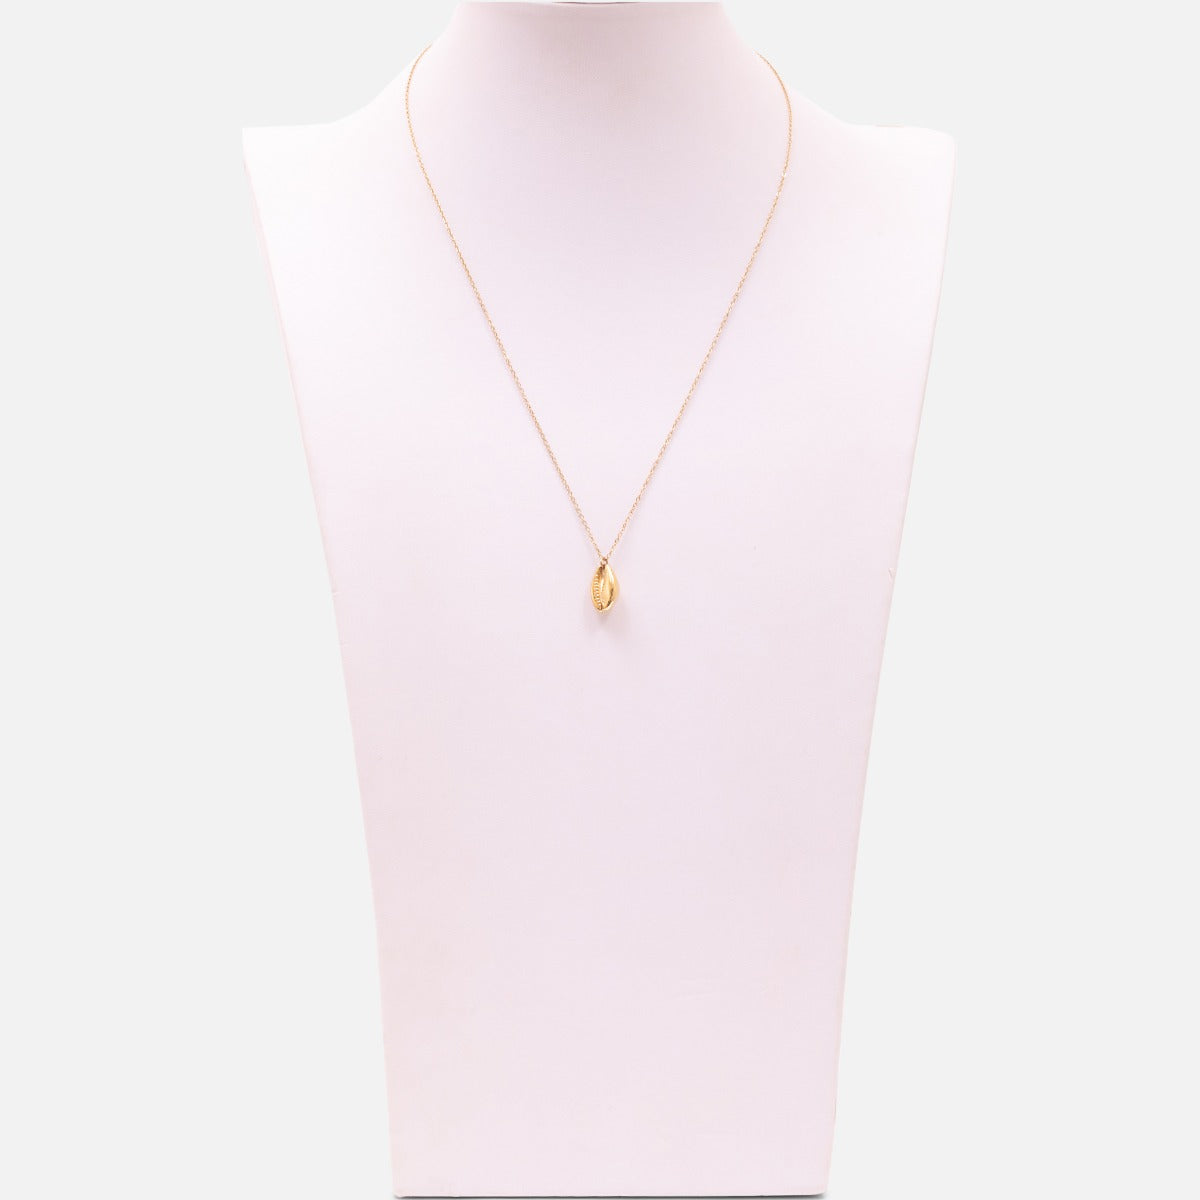 Golden stainless steel necklace with seashell charm 